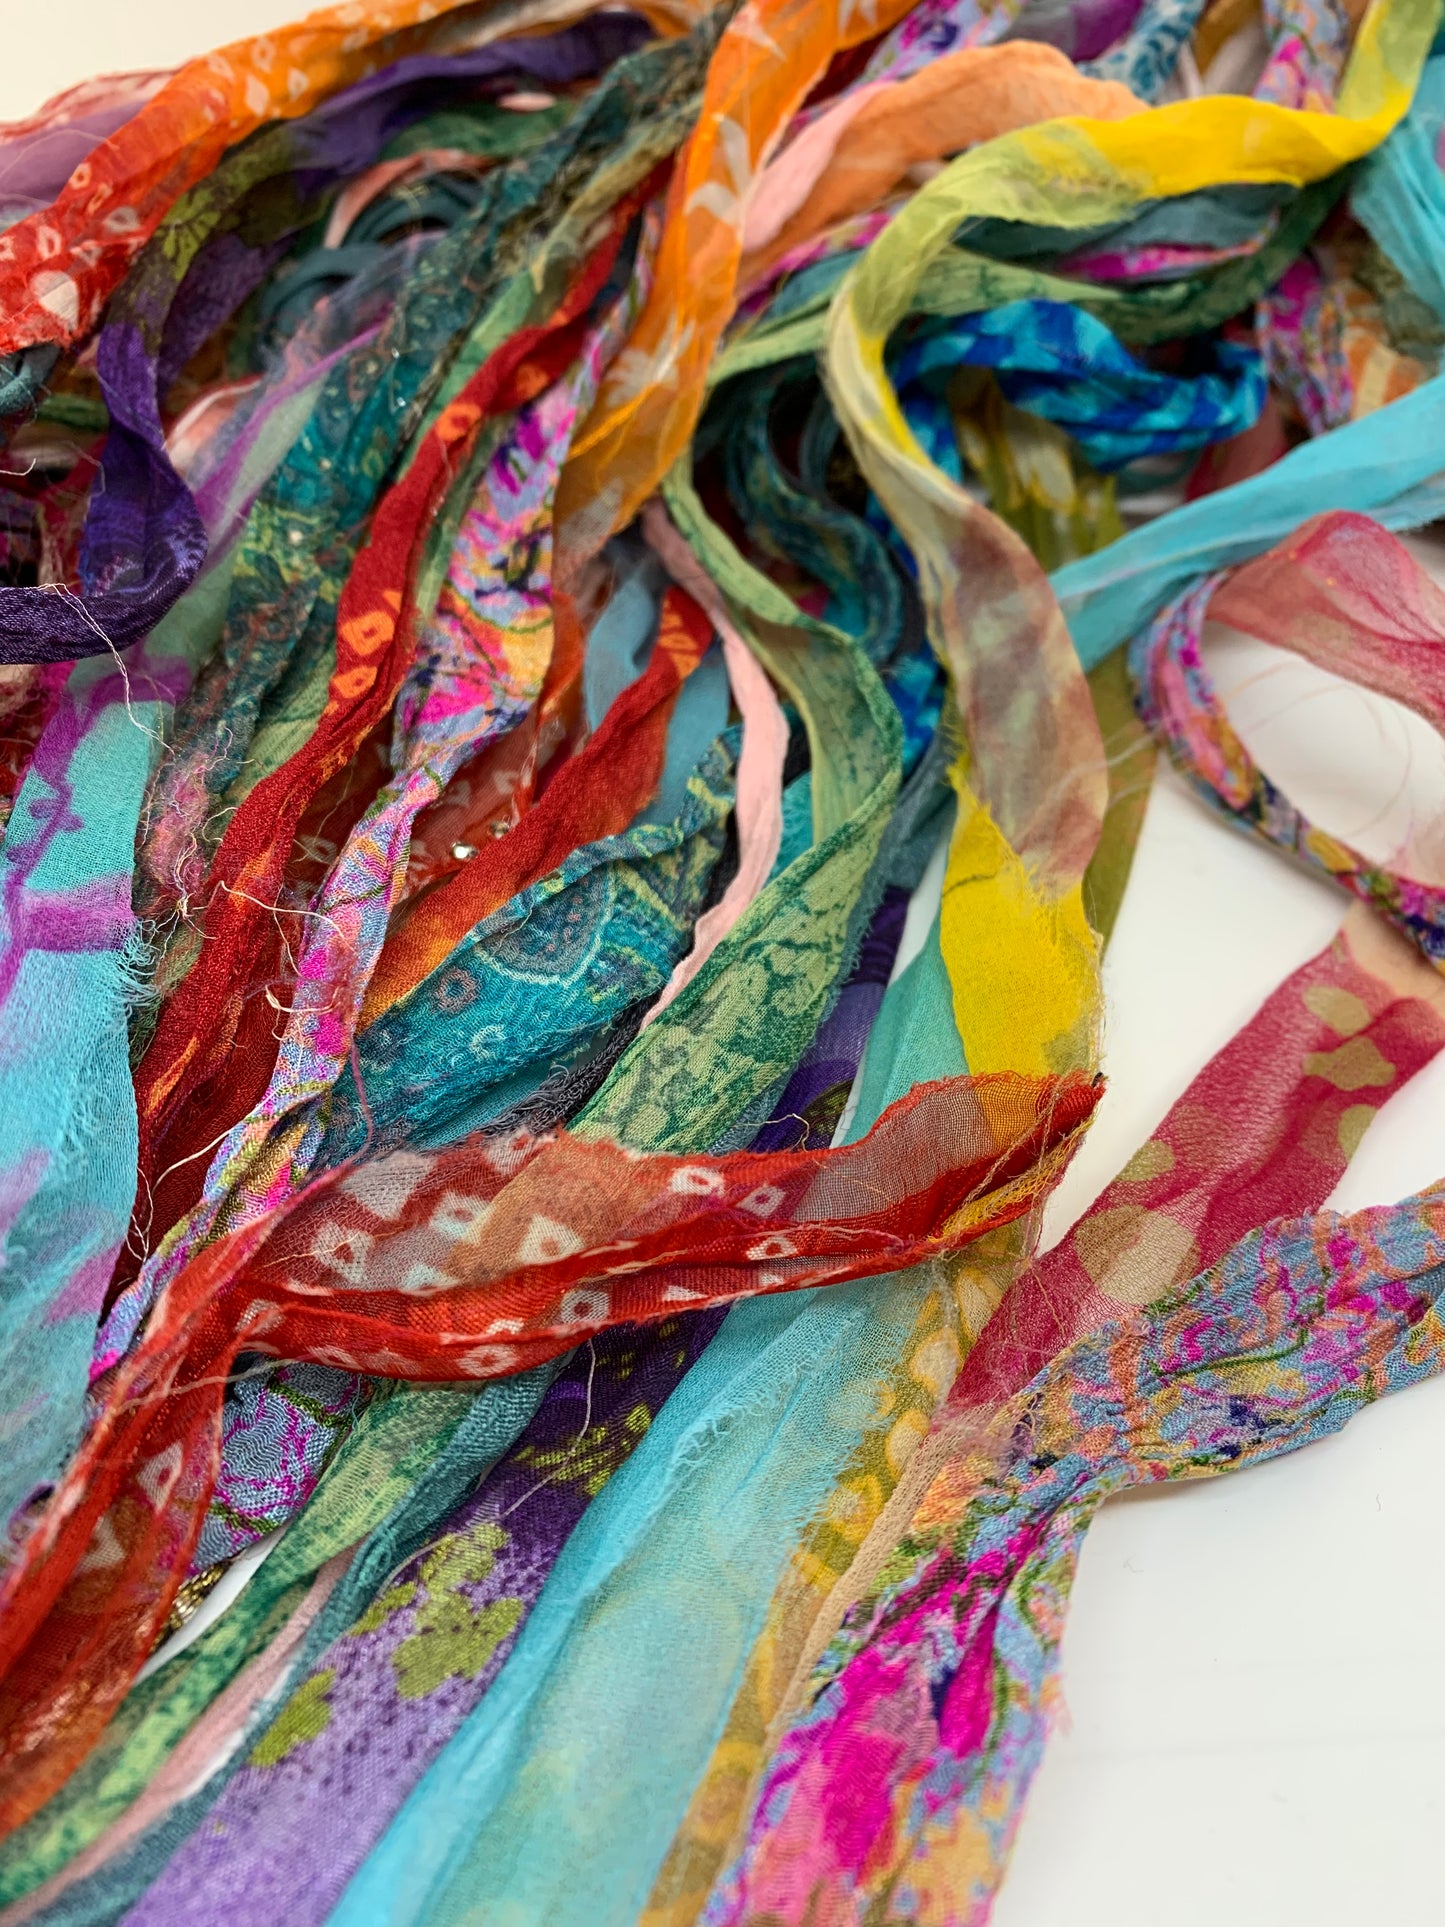 Remnants from silk scarf making. SOLD